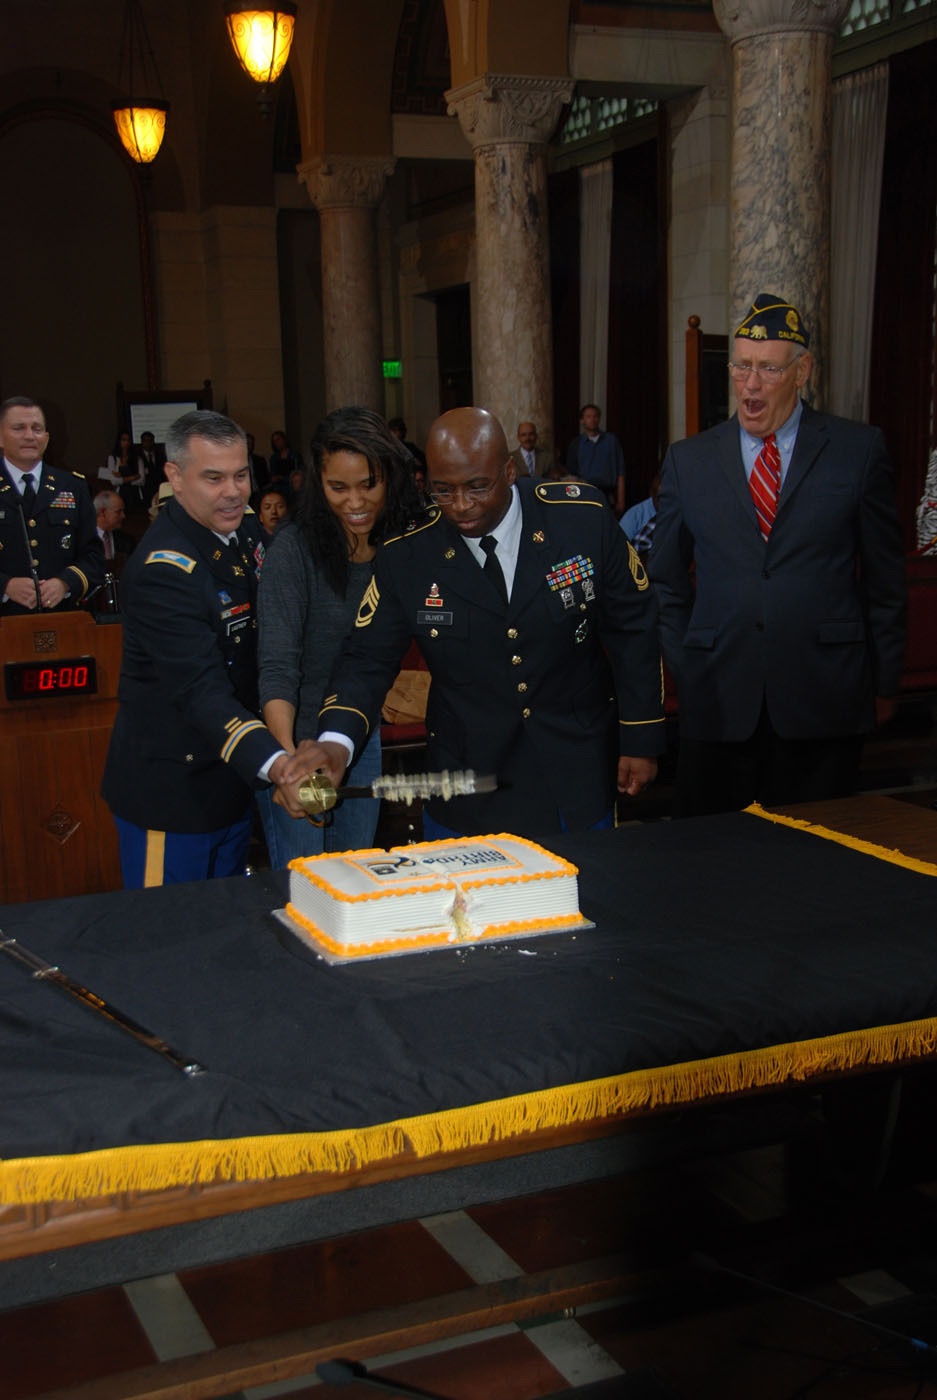 LA city council honors the US Army's 237th Birthday